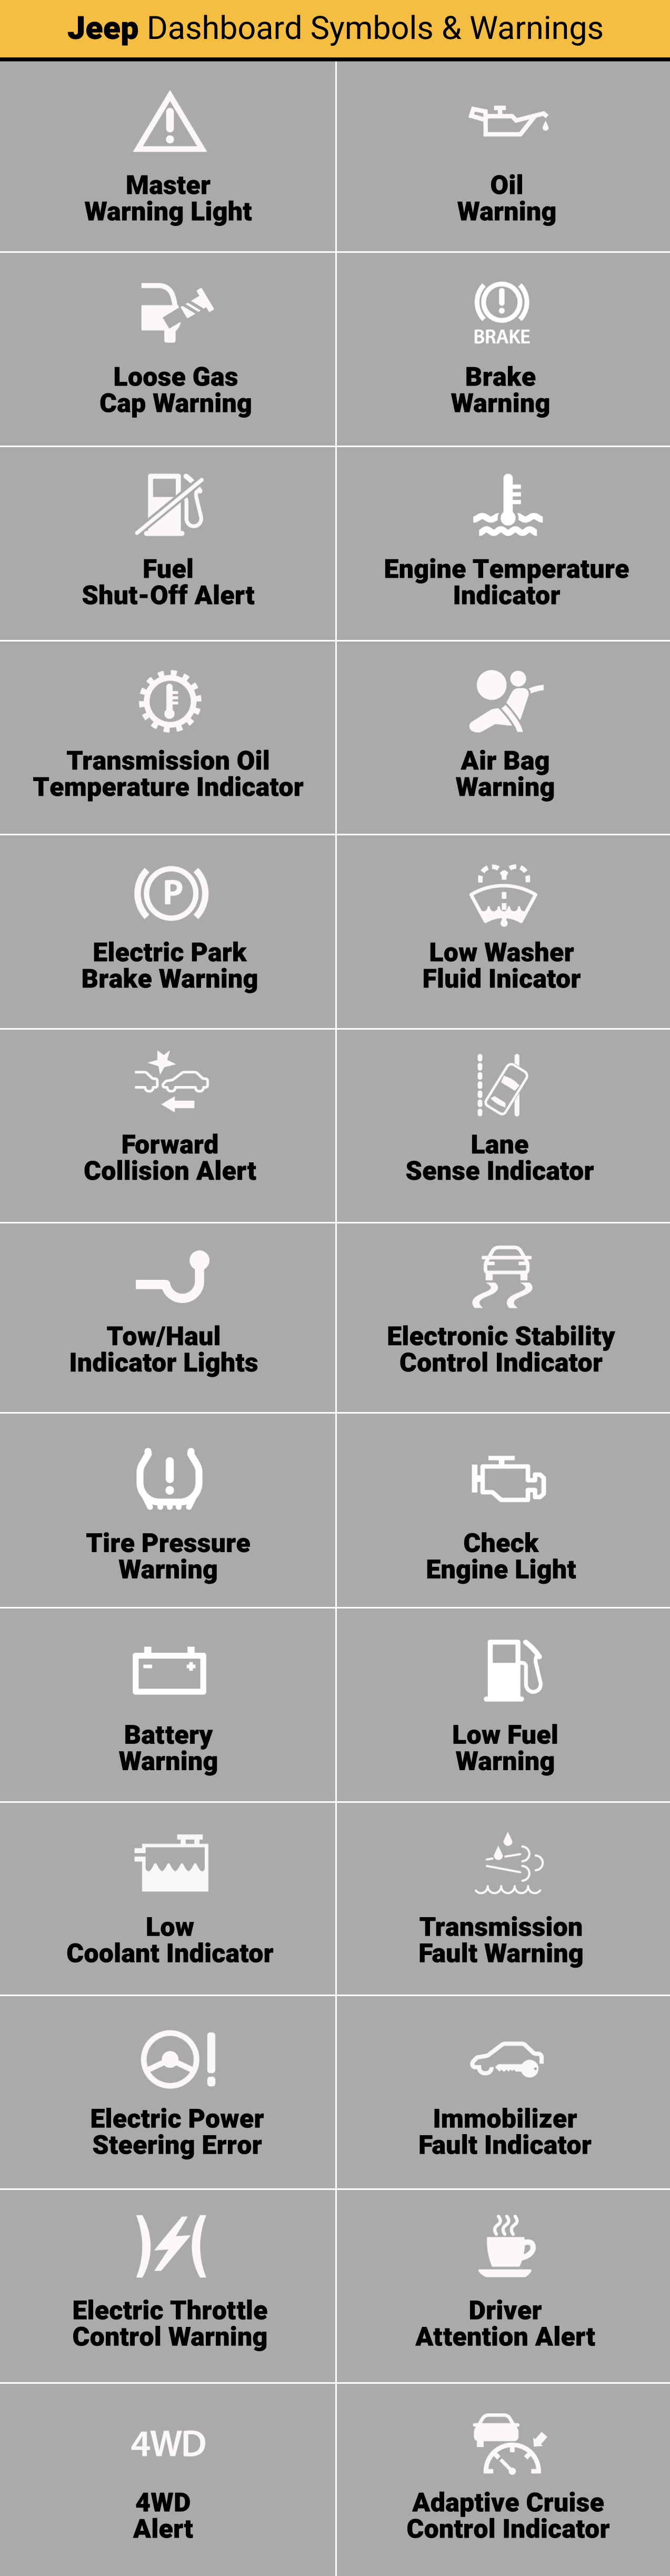 Jeep Dashboard Symbols Meaning